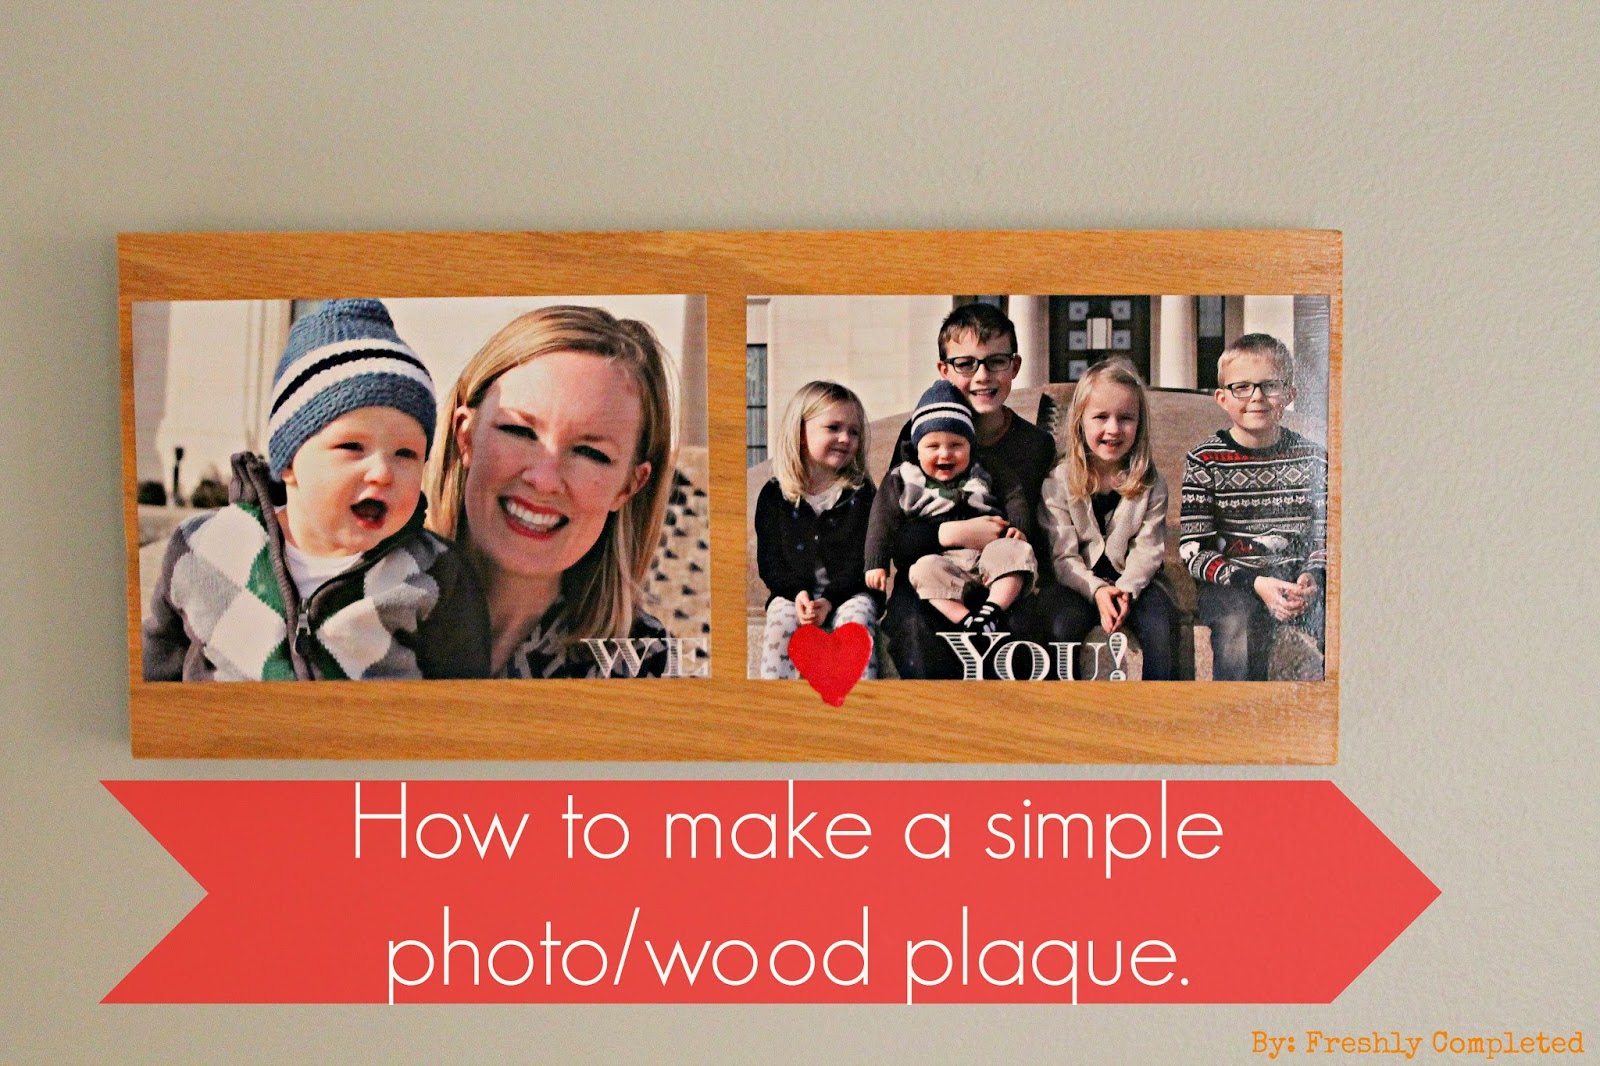 Freshly Completed: How to Make a Simple Photo/Wood Plaque